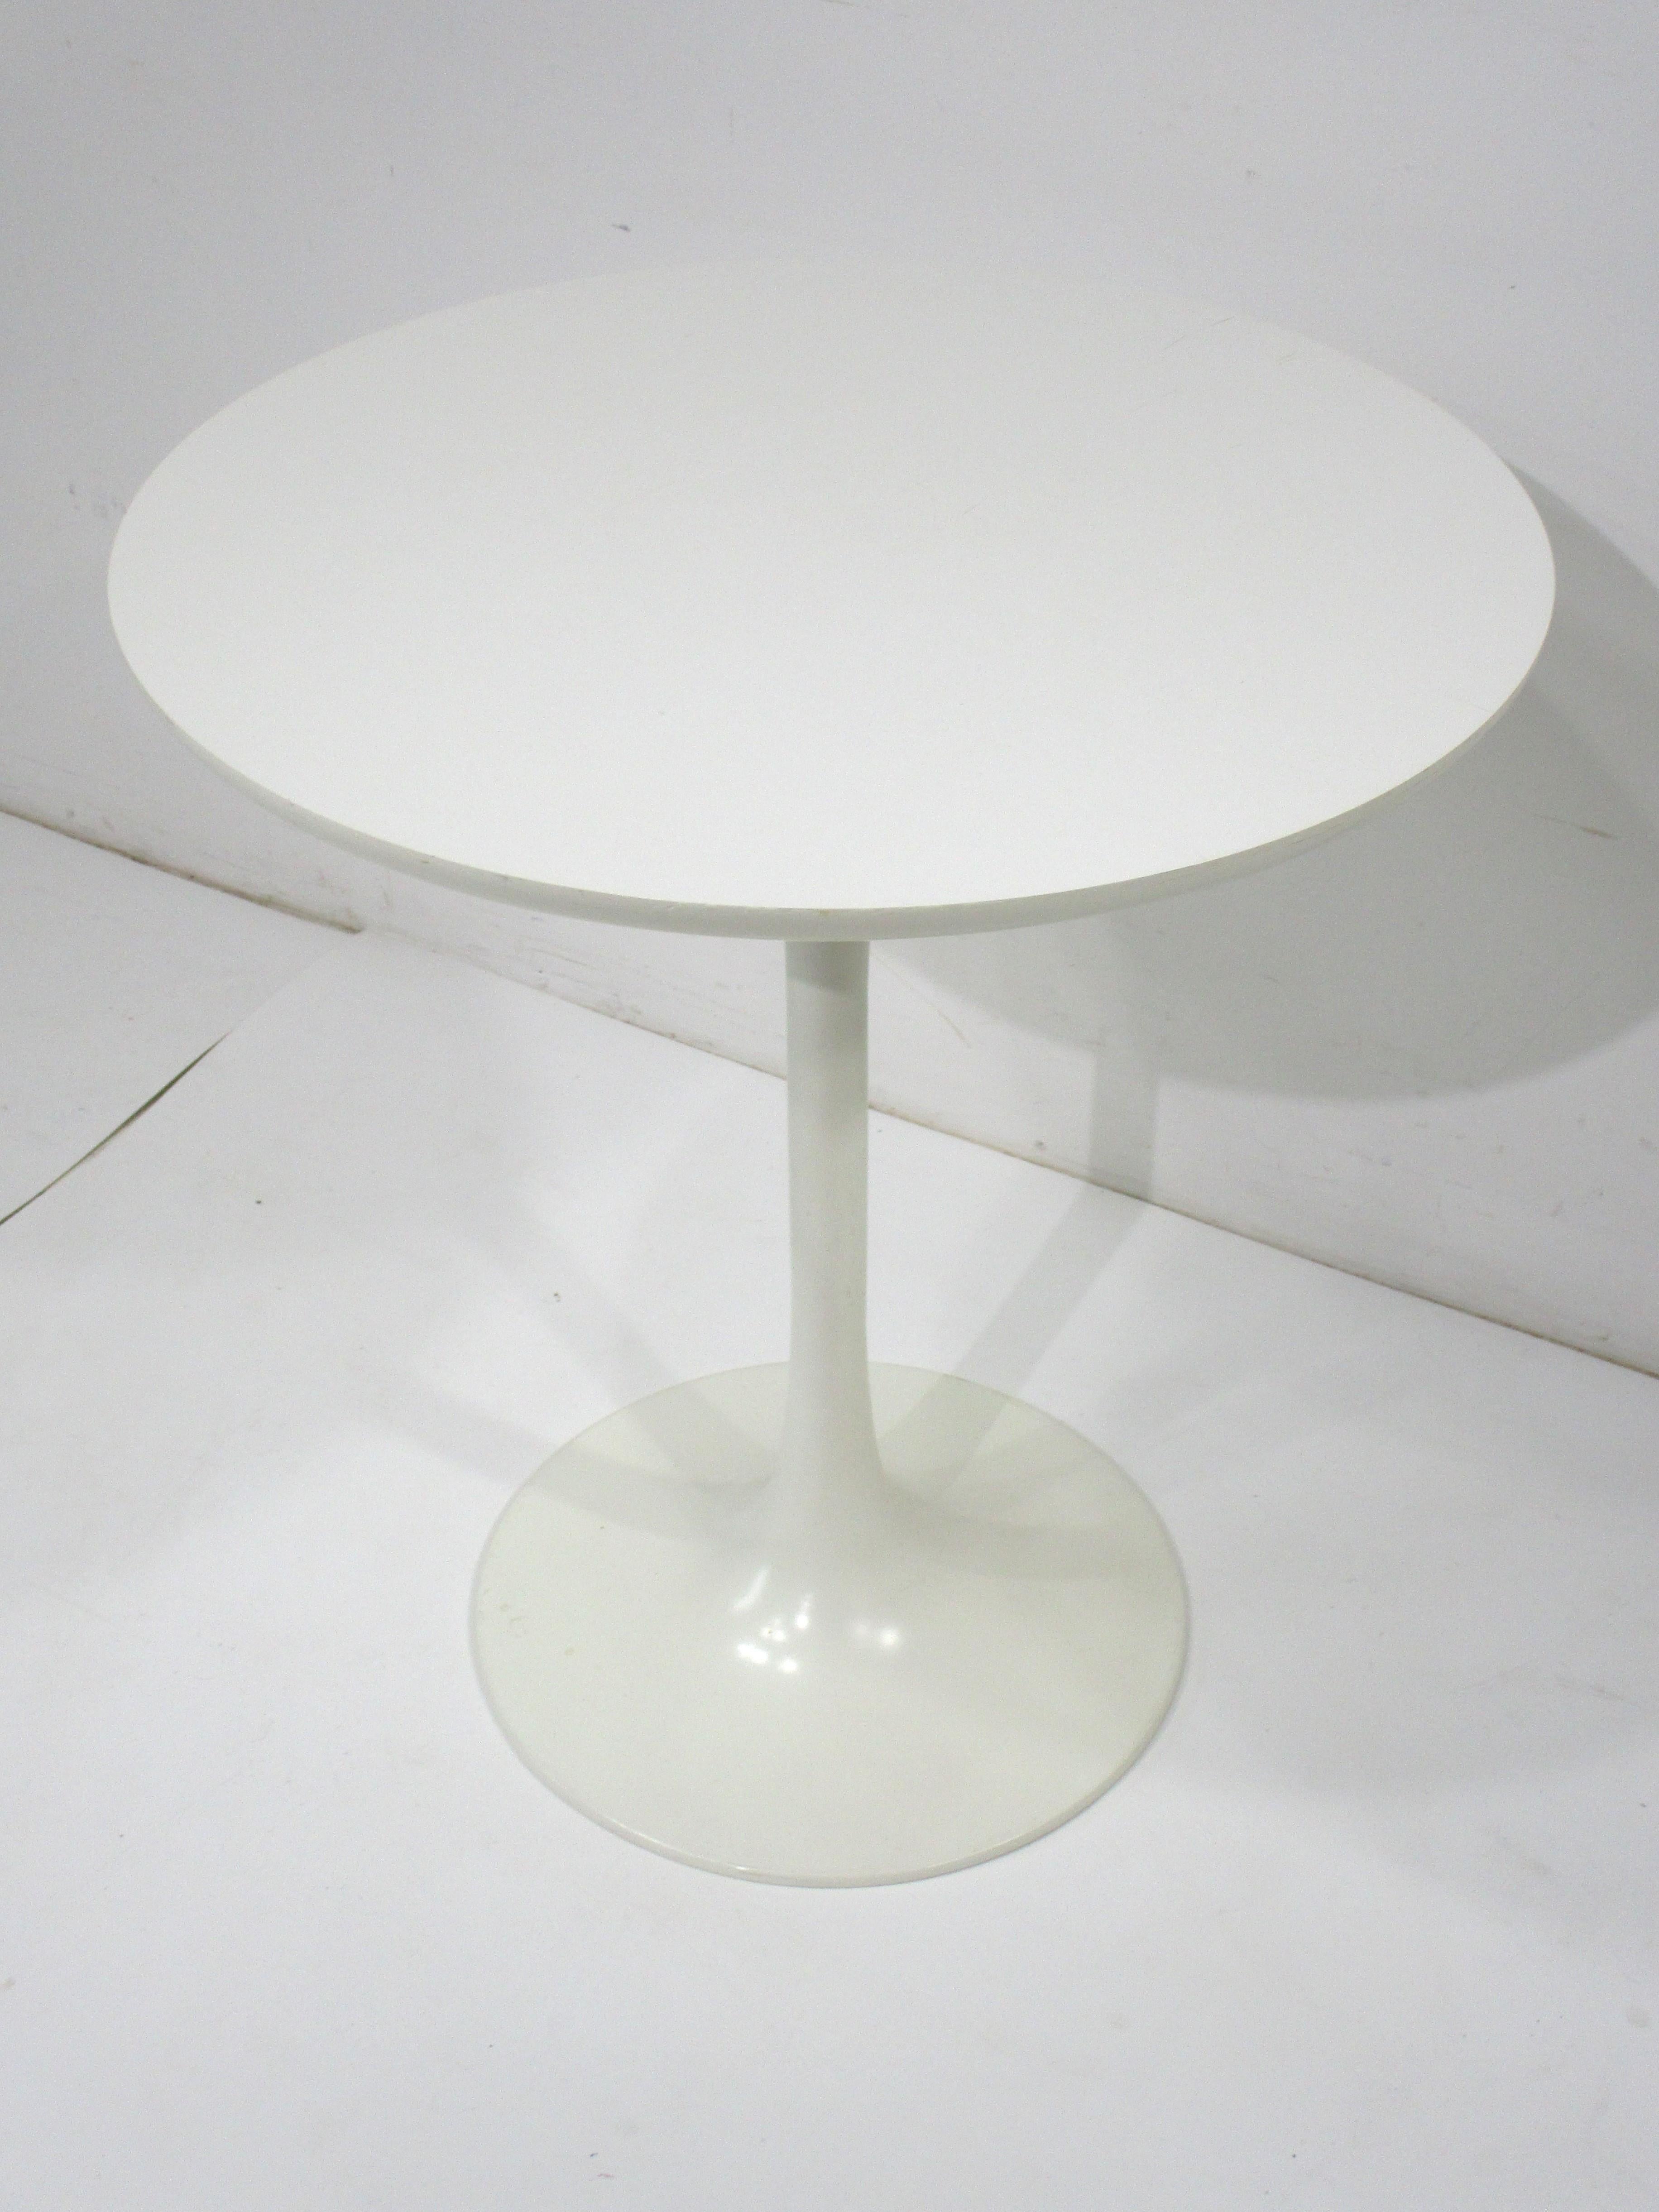 American Taller Tulip Side / Lamp Table by Maurice Burke in the style of Saarinen 